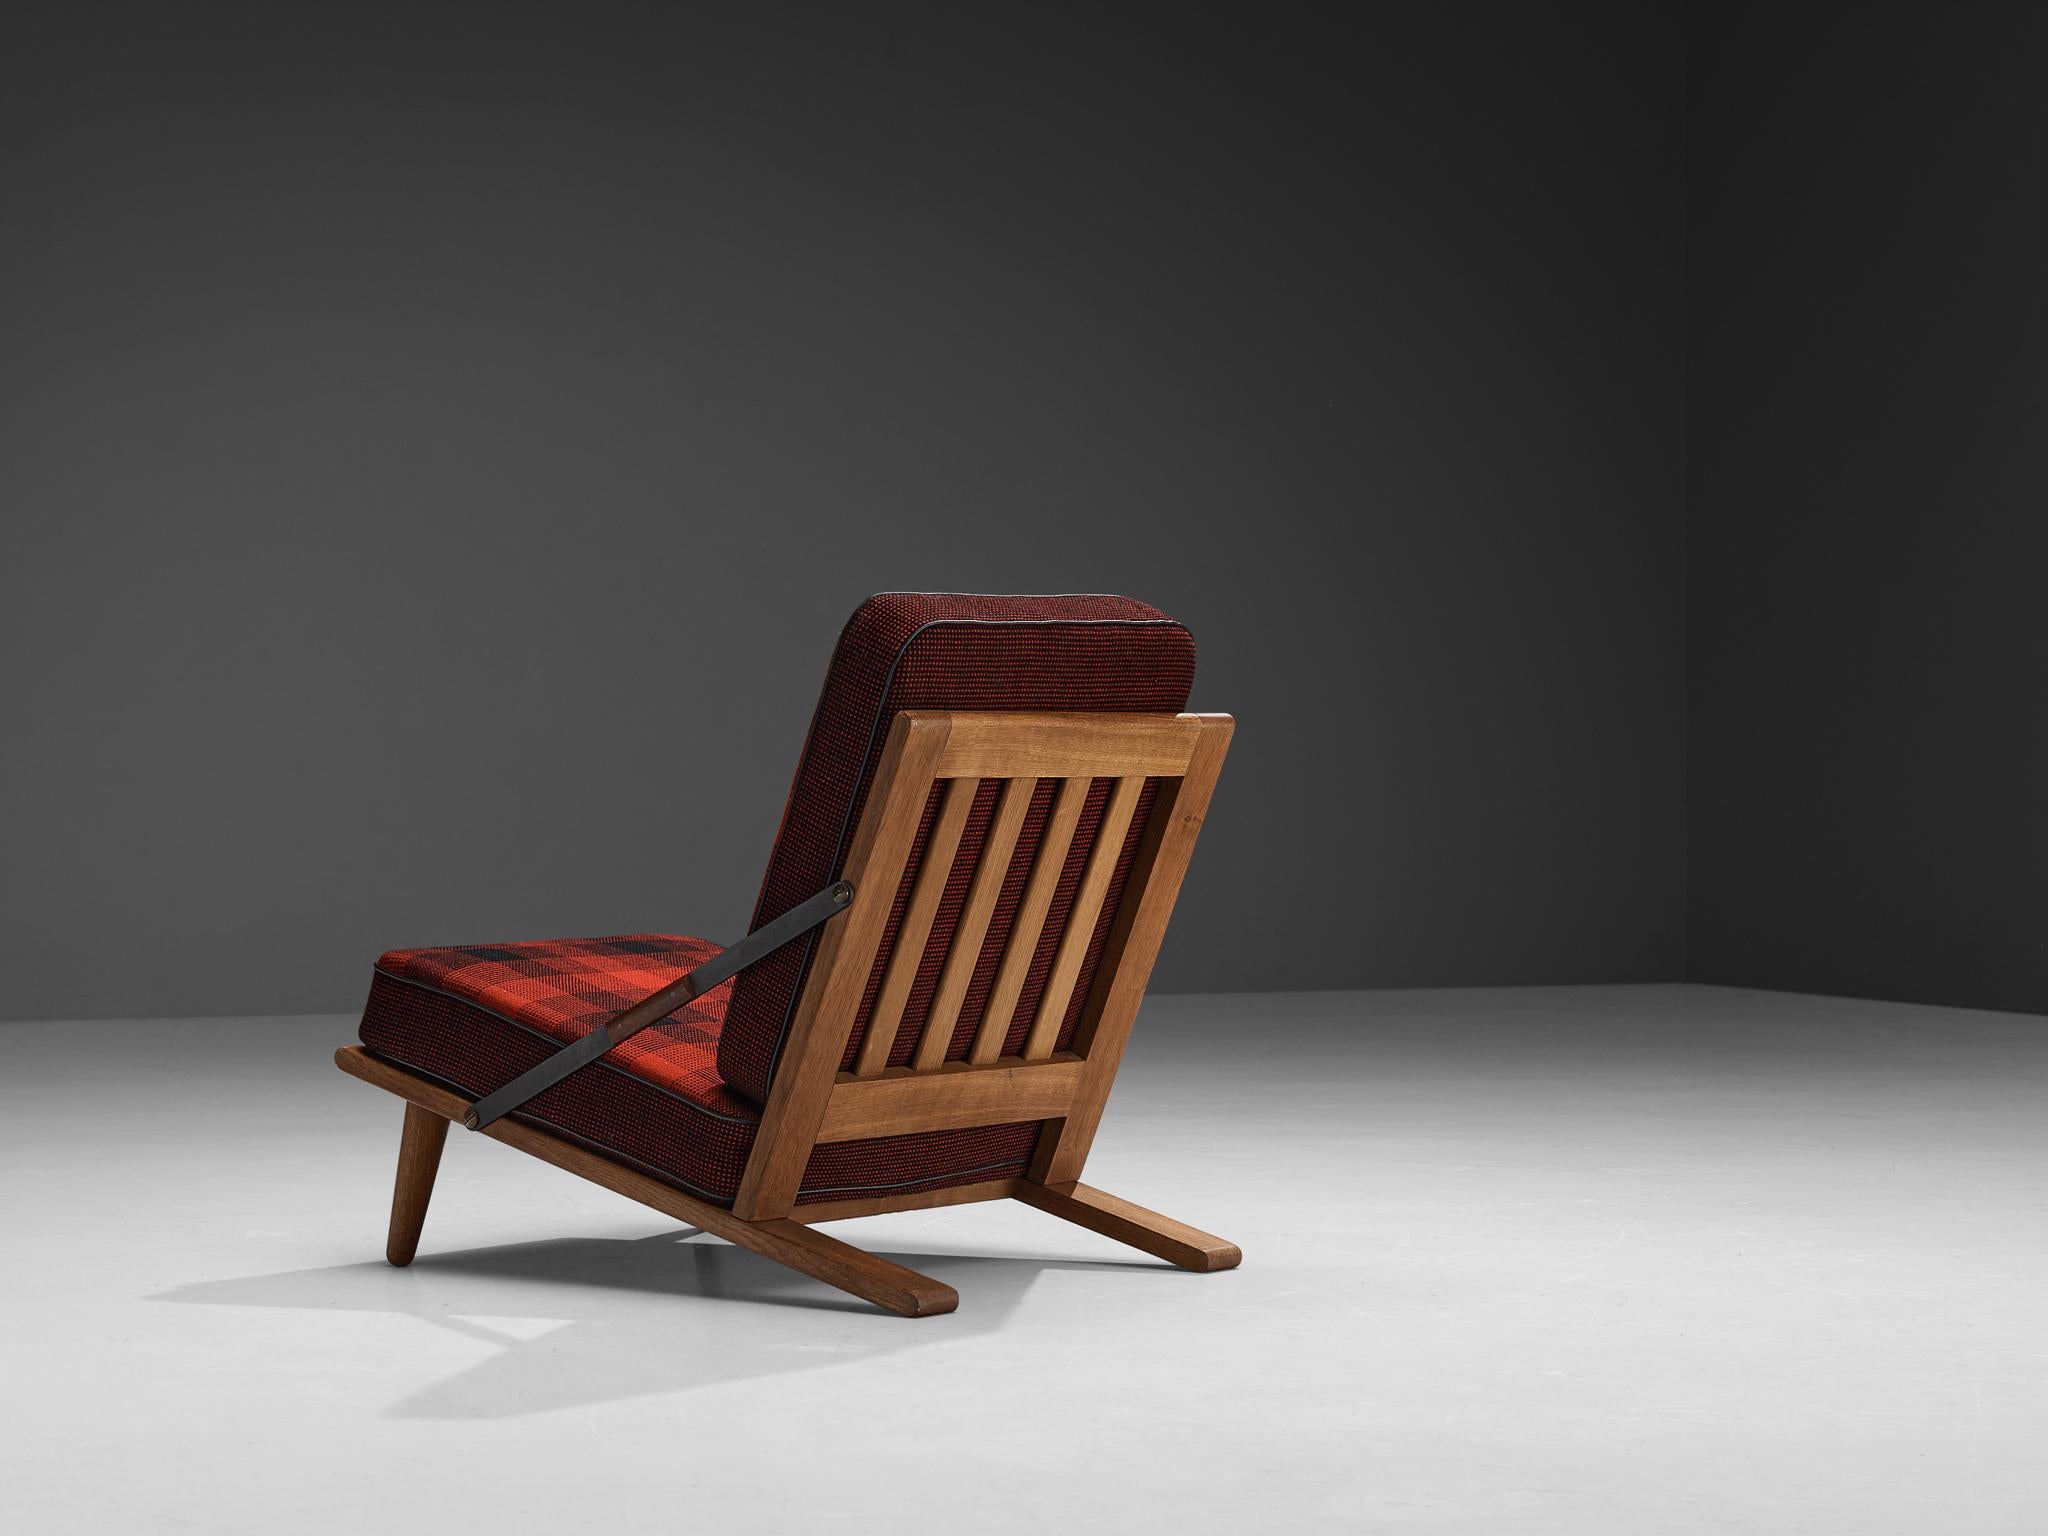 Rare Børge Mogensen for Andreas Graversen, easy chair, original tartan wool from the Cotil Collection, oak, teak, metal, Denmark, 1954 

This early edition lounge chair is designed by one of Denmark's masters of mid-century design; Børge Mogensen.